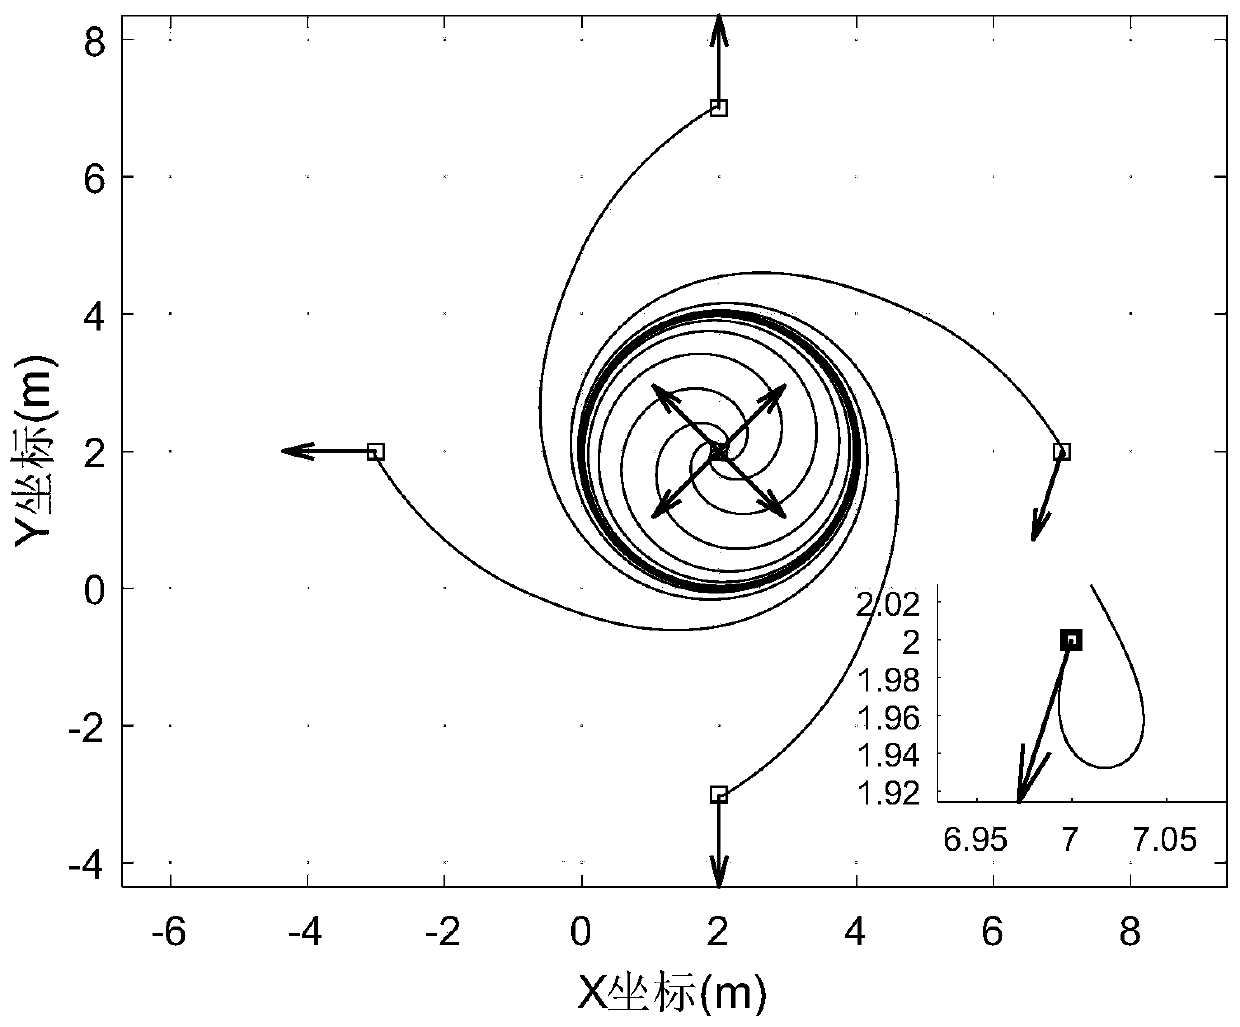 A Surrounding Tracking Method of Moving Target Based on Distance Measurement